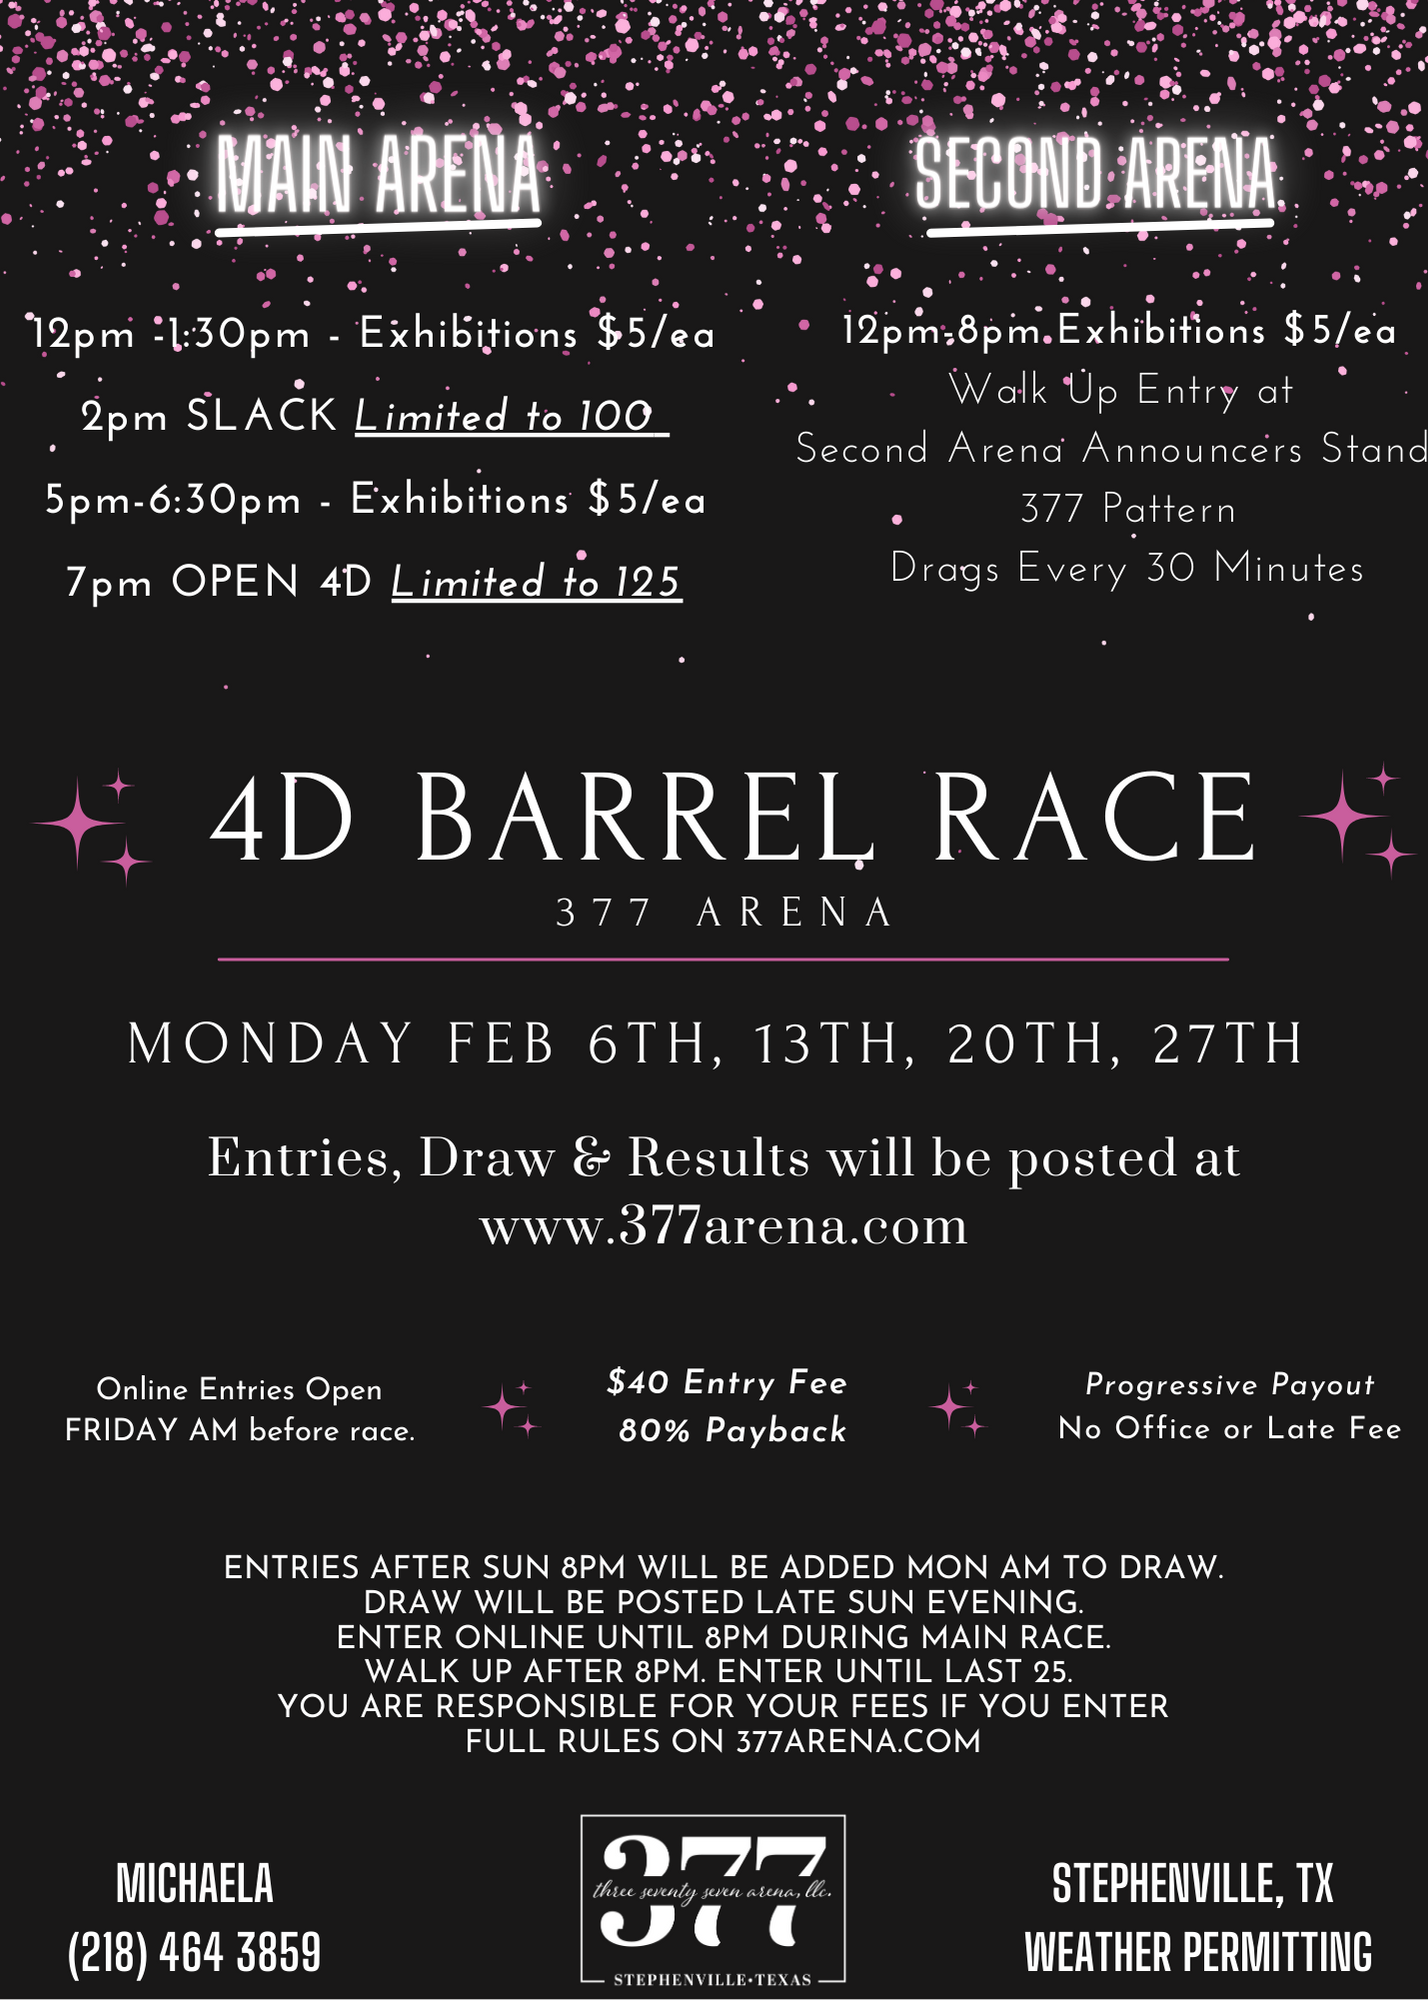 Open 4D | 2nd Arena Exhibitions 12-8pm